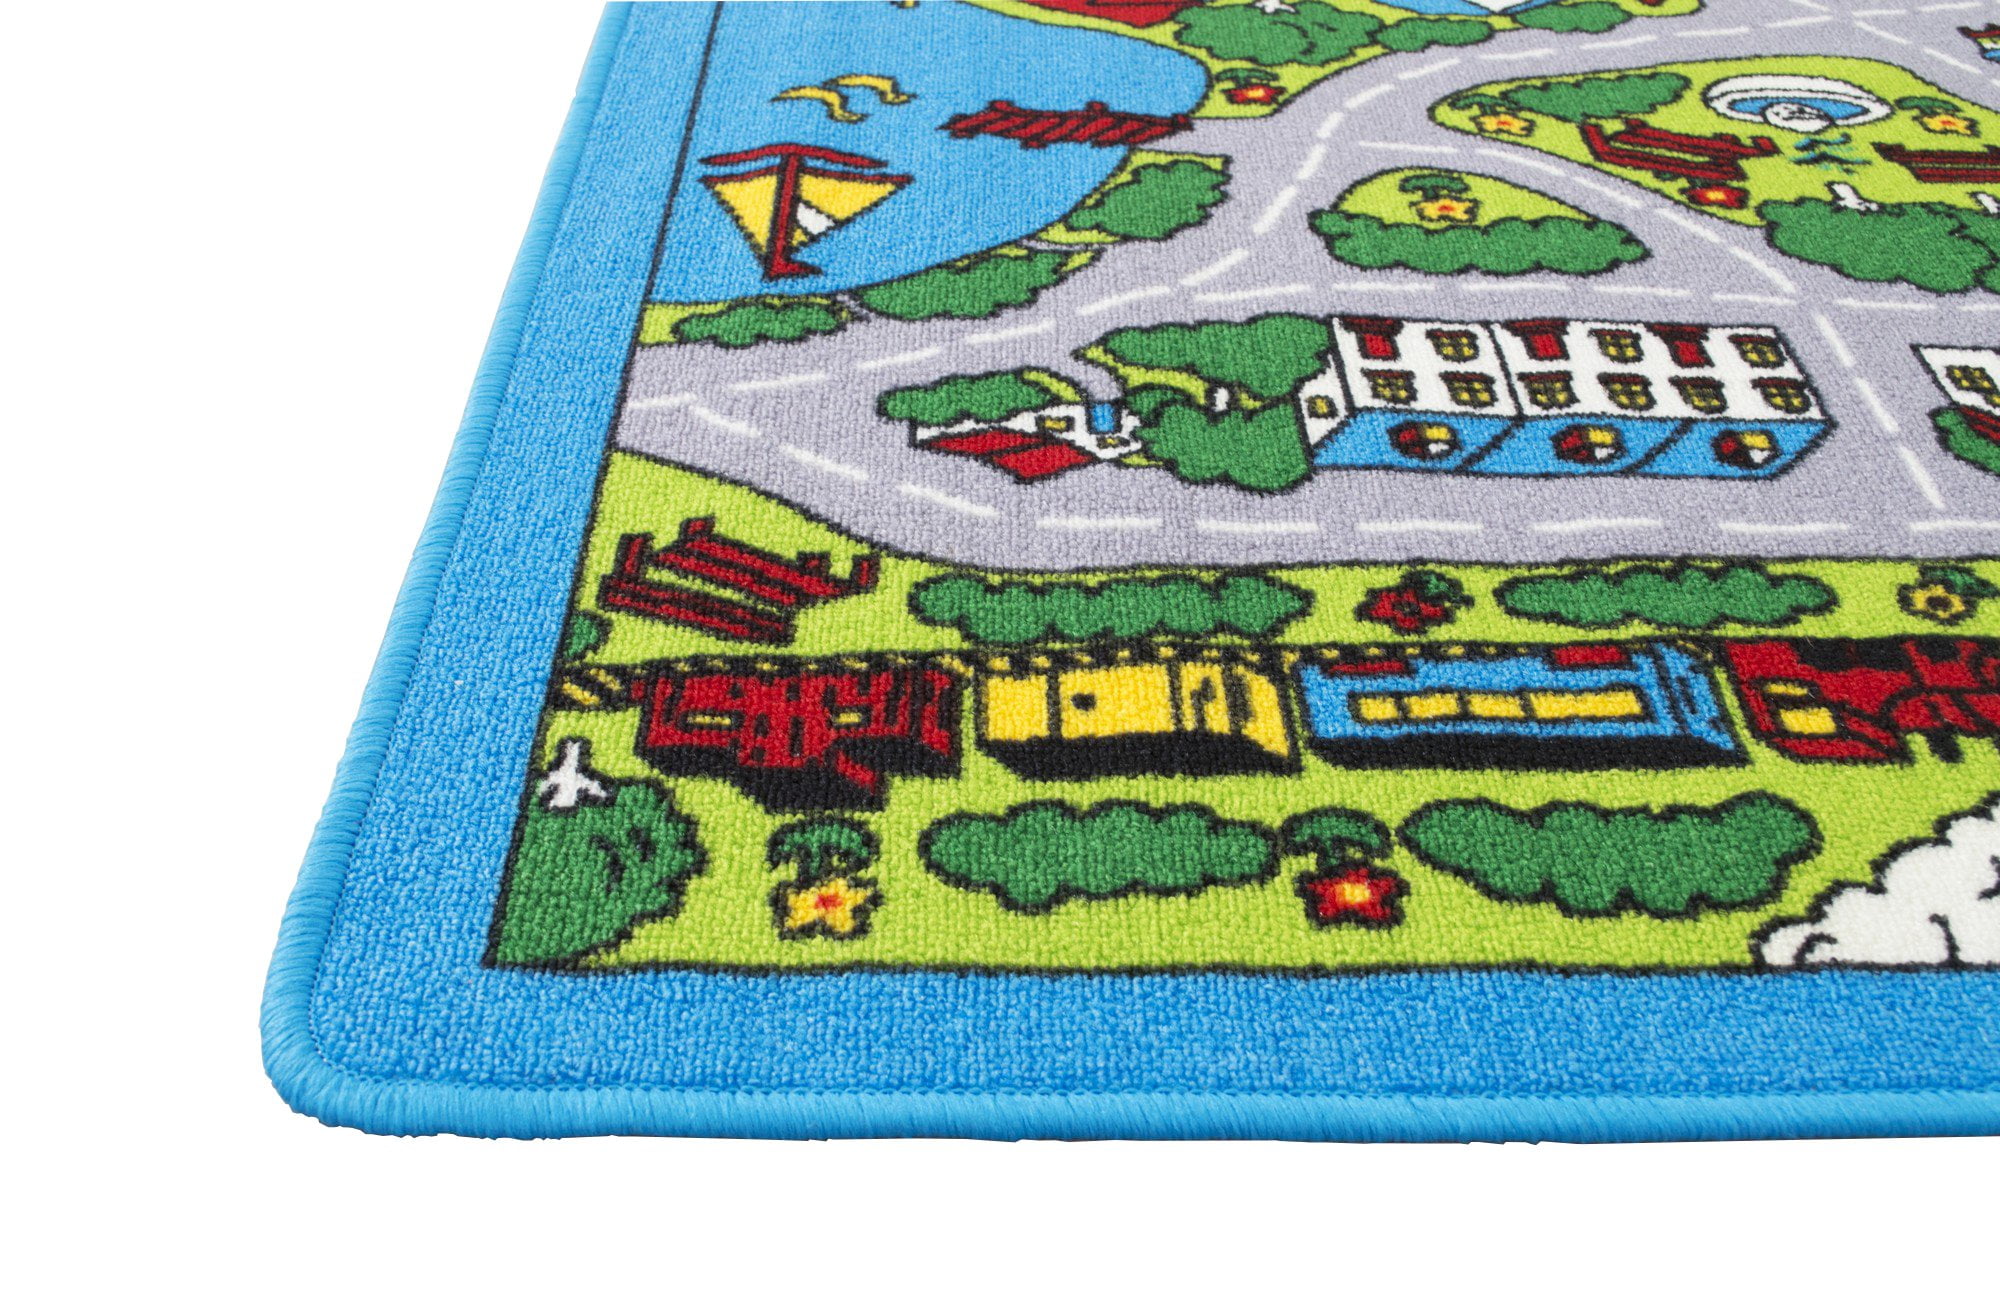  Car Rug Play Mat for Kids,Road Traffic Carpet for Playing Cars  Toys, City Life Educational Area Rugs,Race Track Game Mat Children Boy Girl  for Children's Room Playroom Nursery 39×79inch/100×200CM : Home